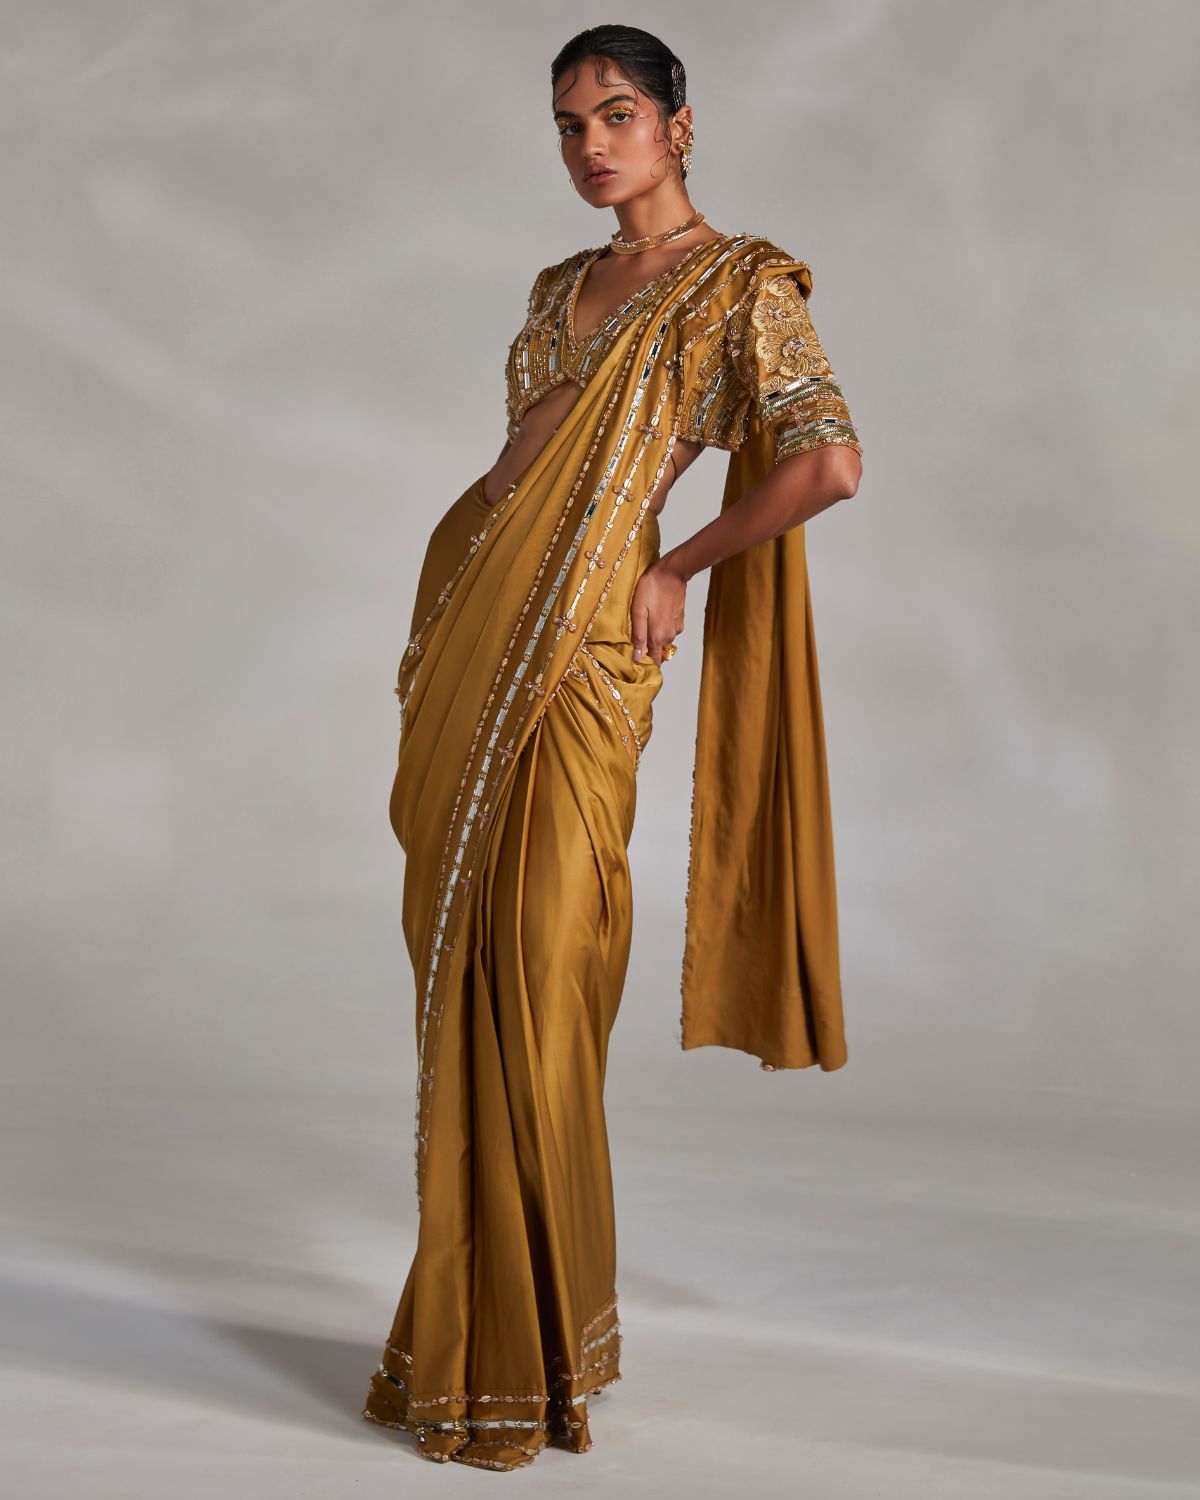 Yellow Pre-draped Sari With Embellished Blouse by Divya Aggarwal